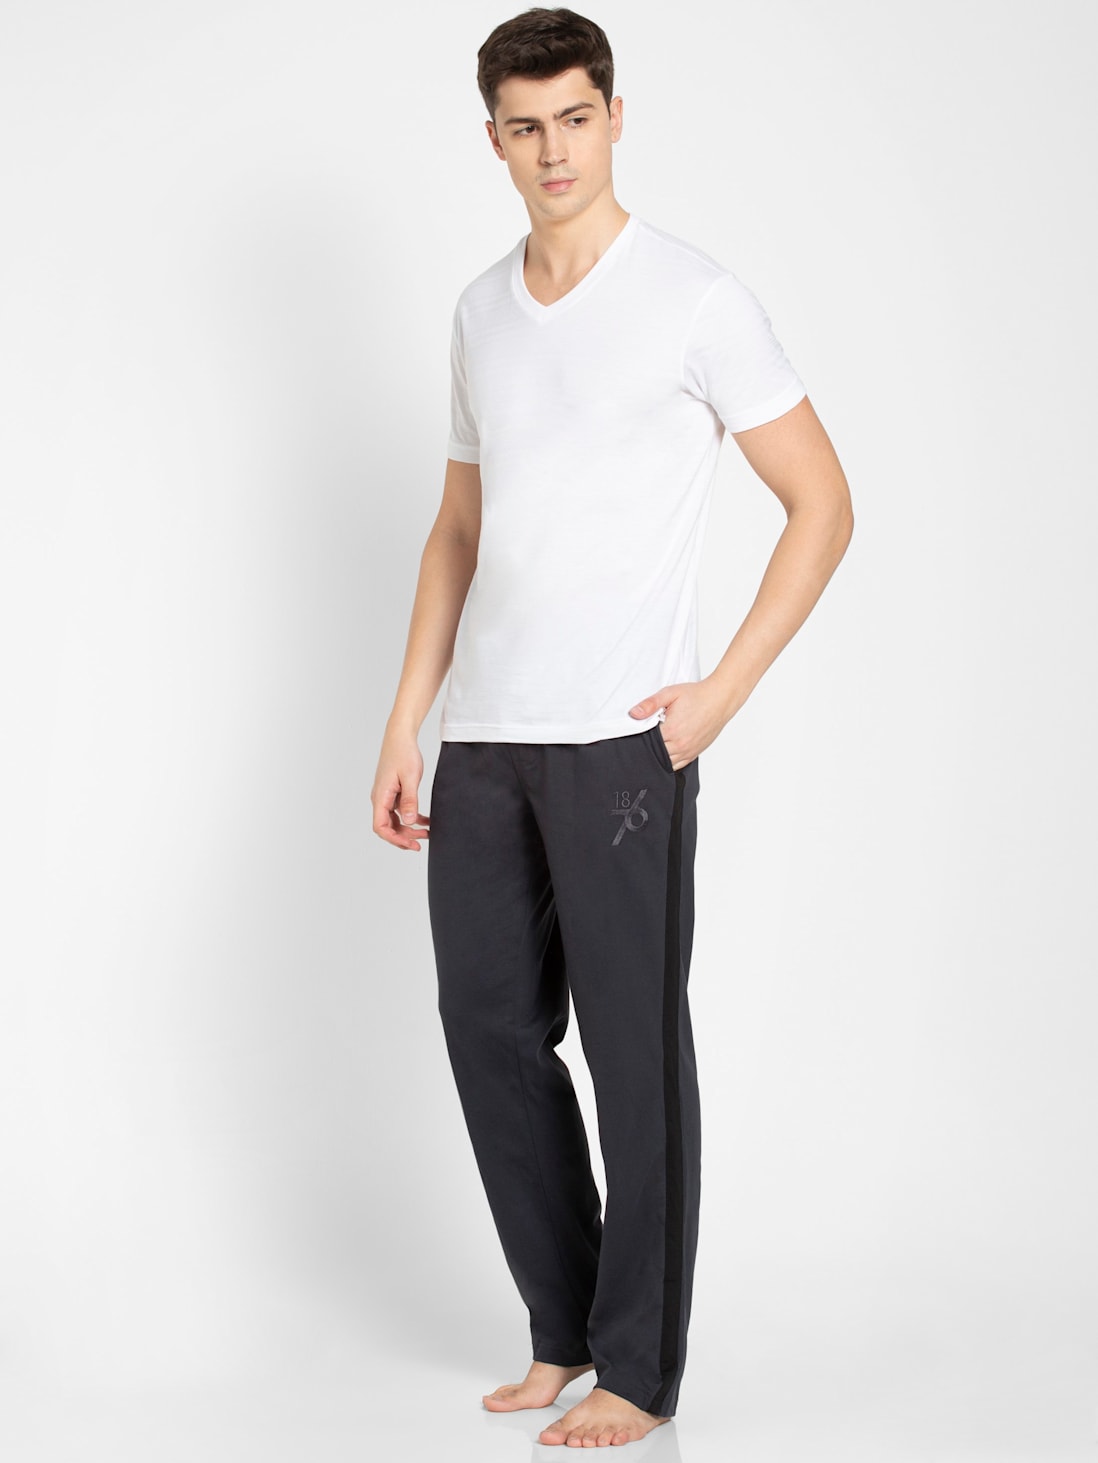 Jockey IM06 Men's Super Combed Cotton Rich Elastane Stretch Slim Fit Solid  All Day Pants with Pockets_Black S : Amazon.in: Fashion